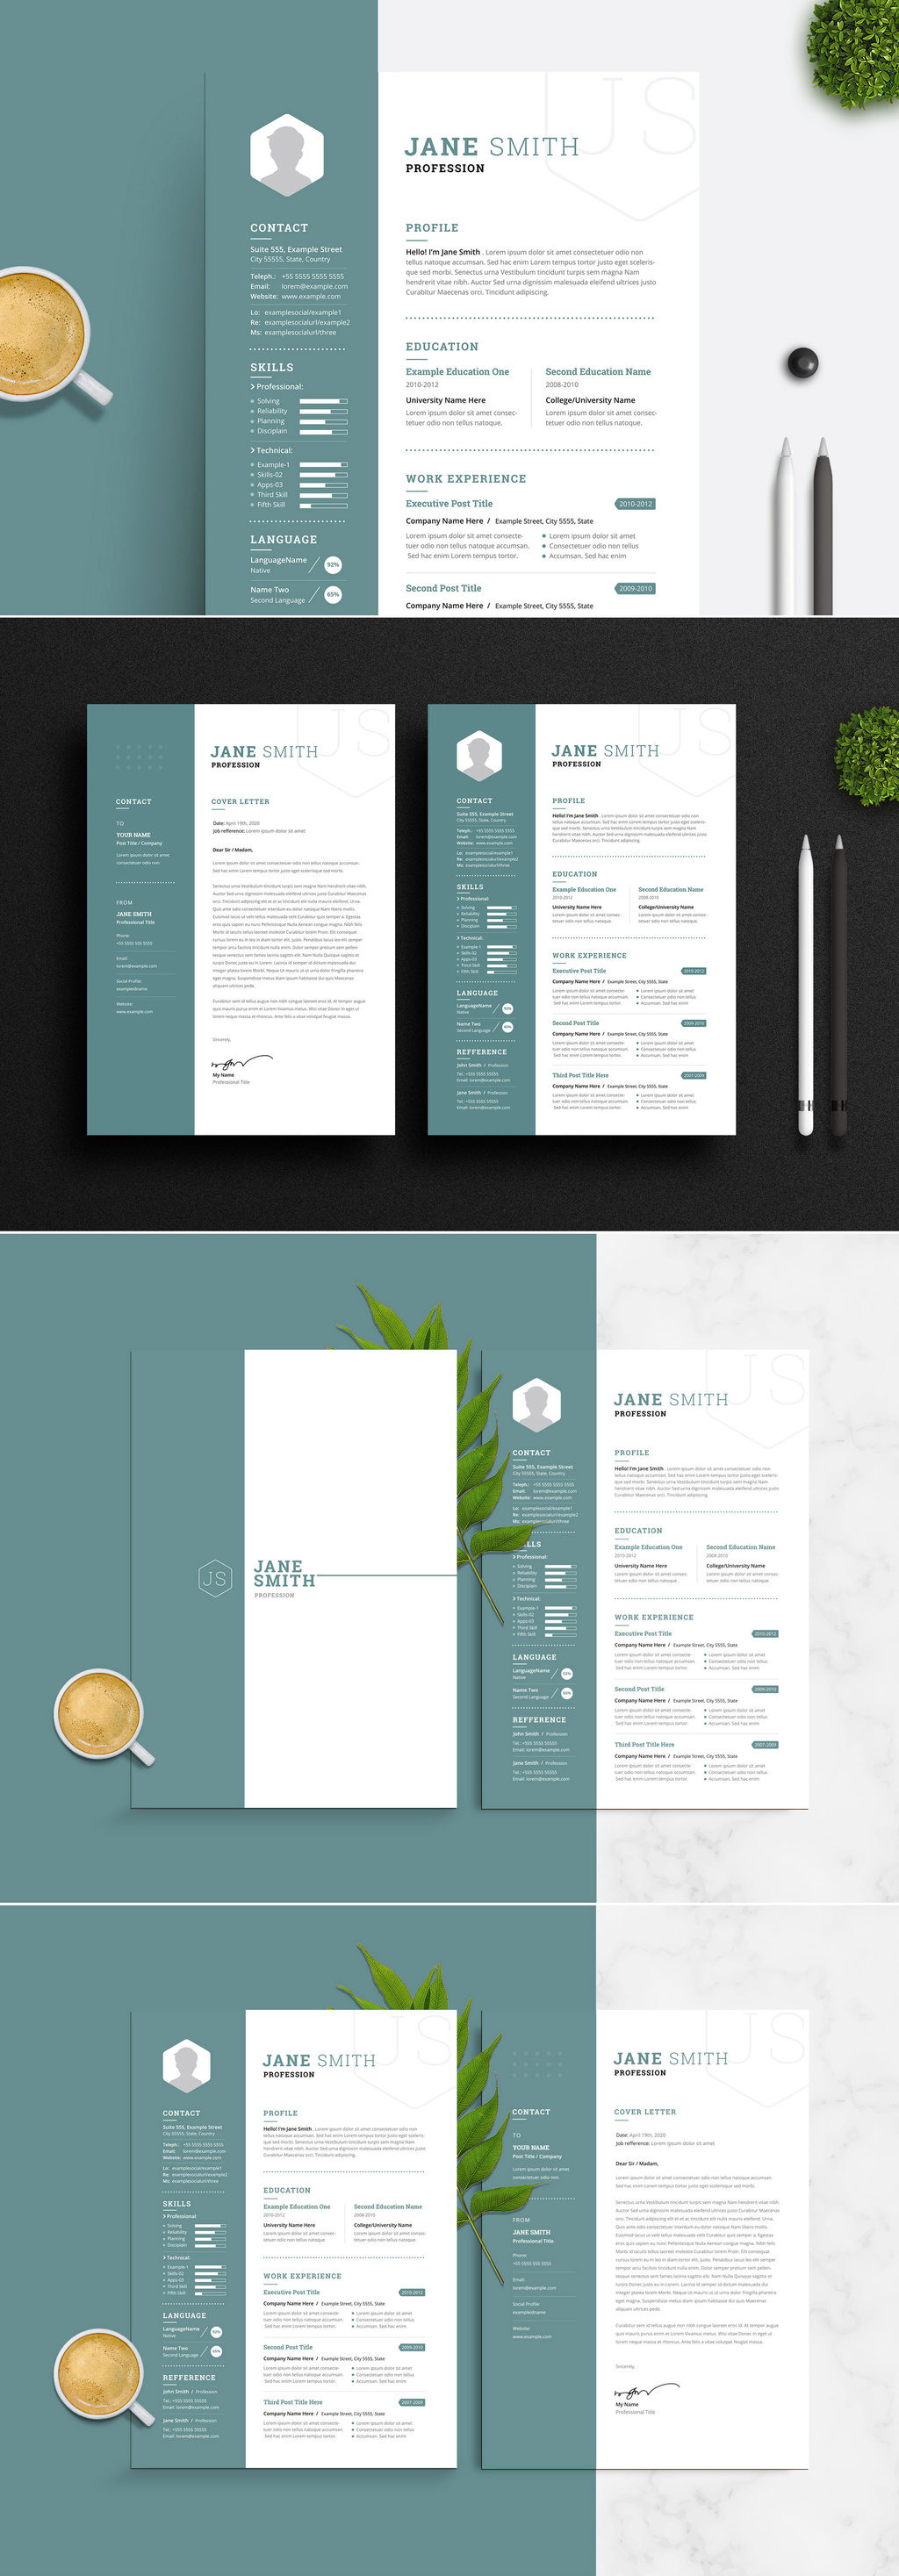 Adobe InDesign Resume and Cover Letter Template